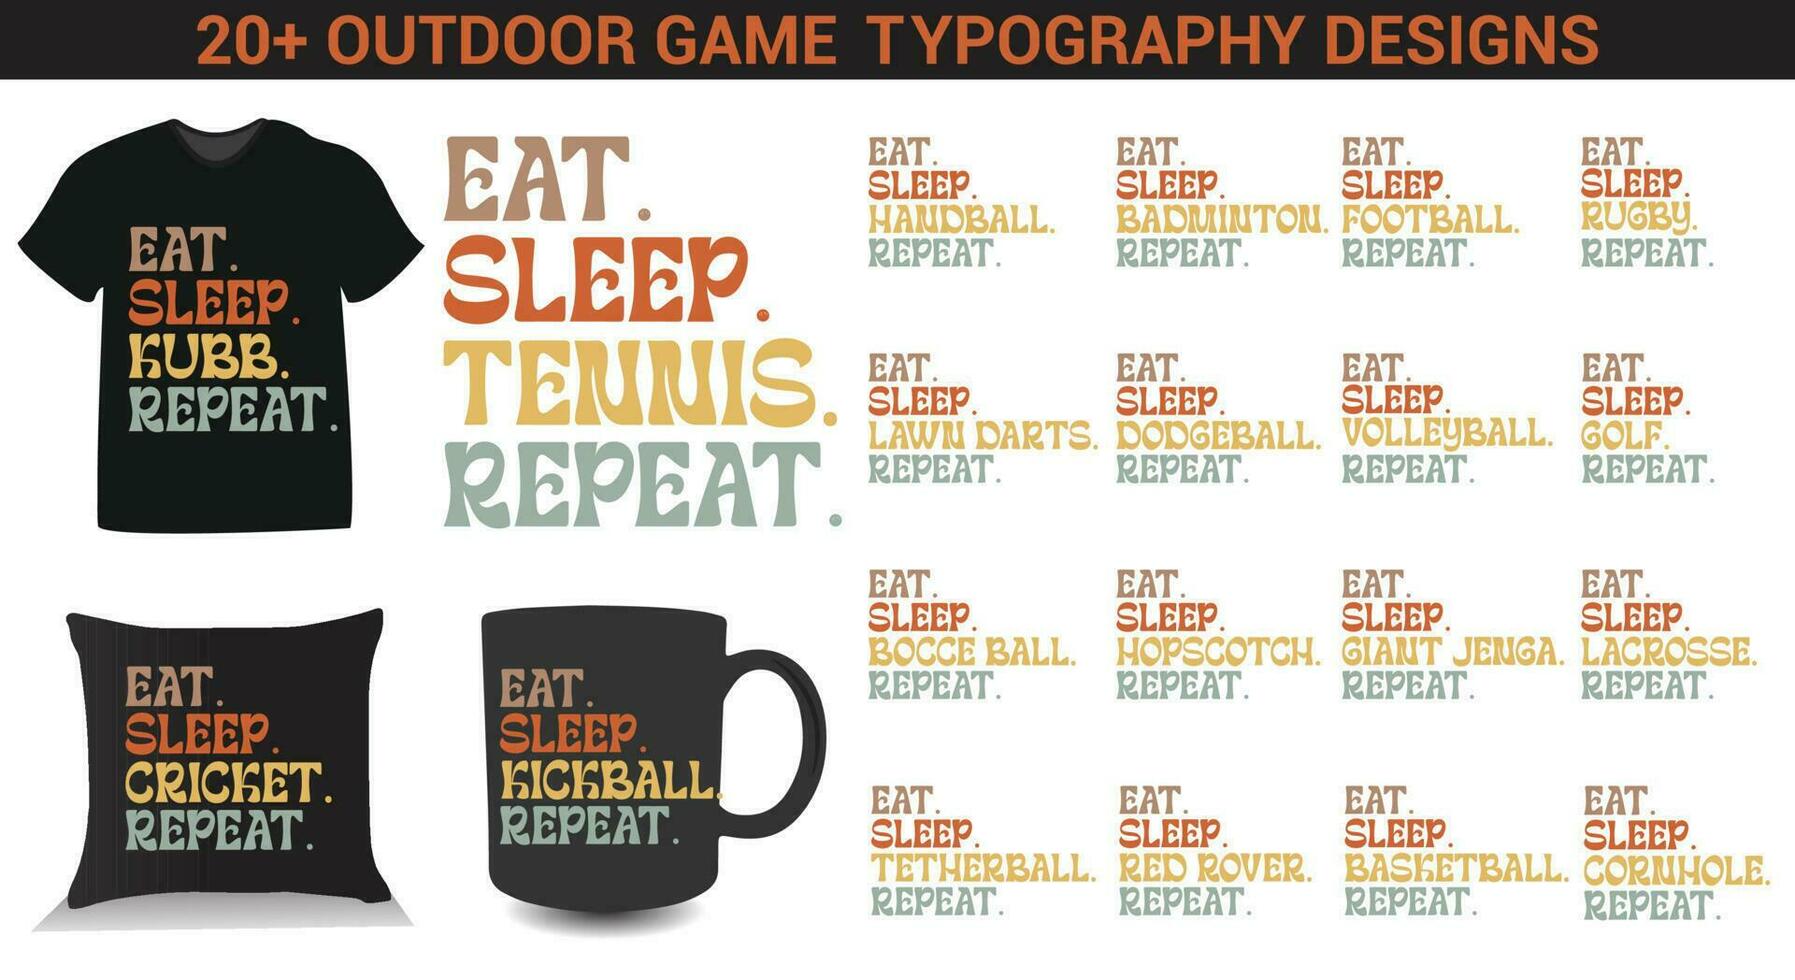 Eat sleep outdoor game repeat t-shirt designs bundle. also for design for t-shirts, tote bags, cards, frame artwork, phone cases, bags, mugs, stickers, tumblers, prints, pillows, etc vector